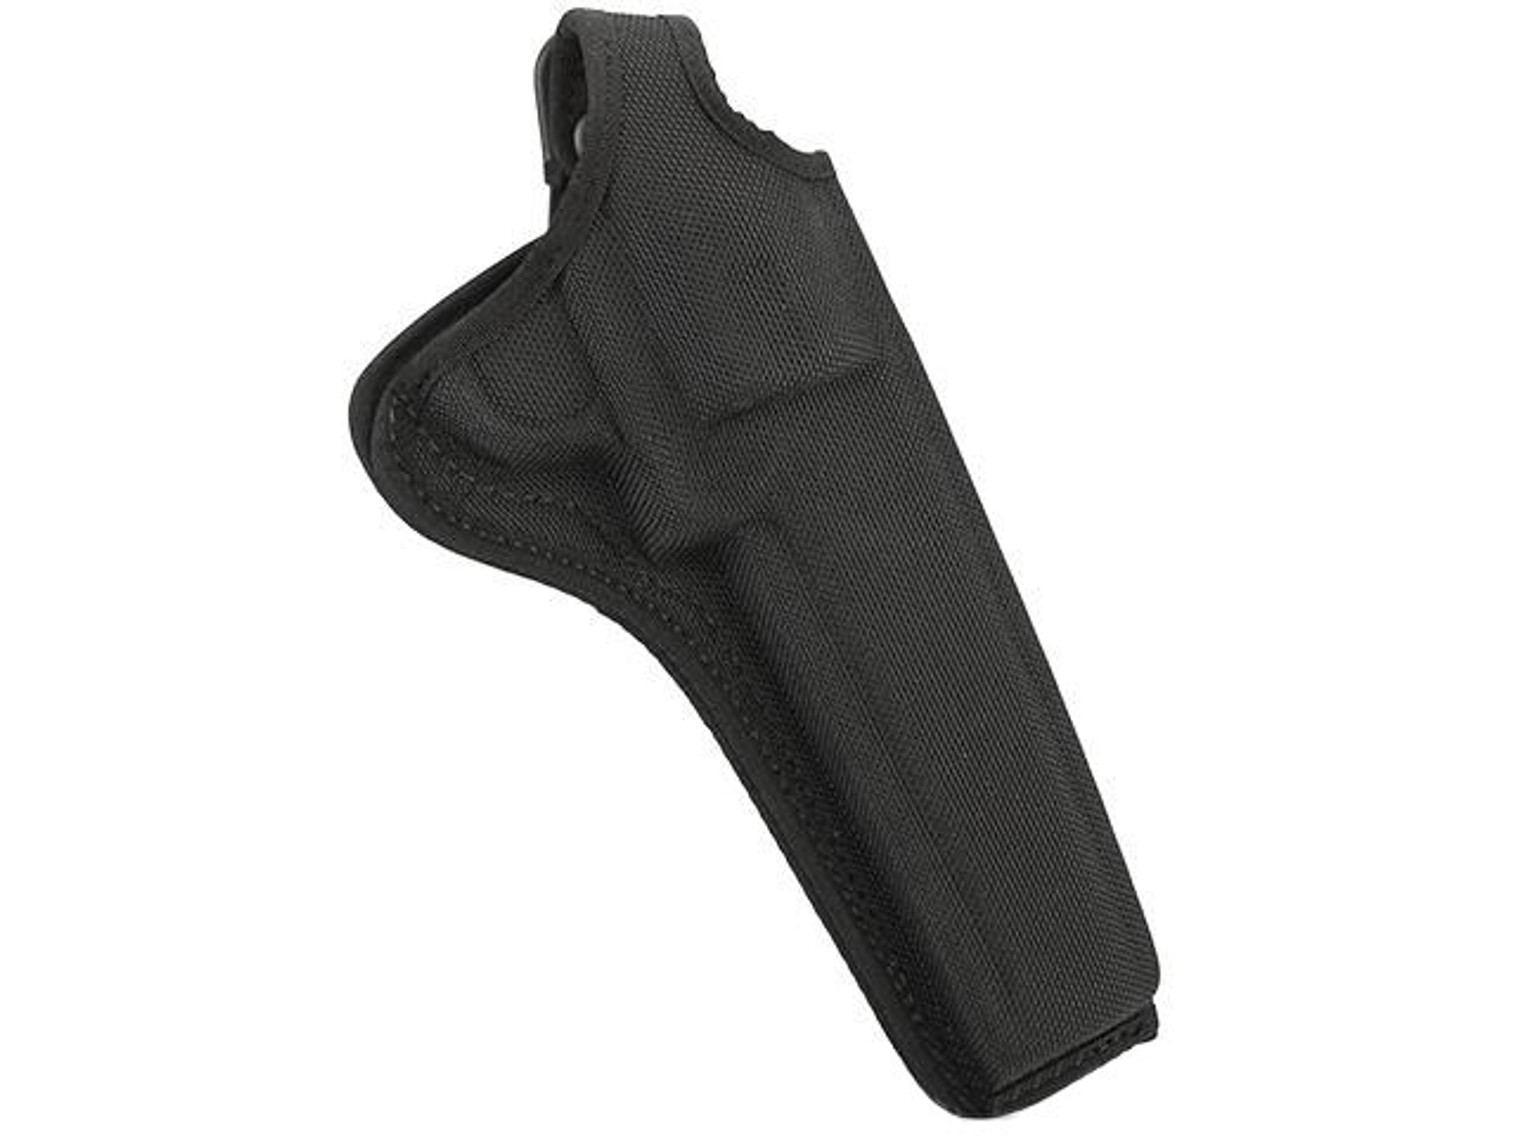 SAFARILAND / BIANCHI AccuMold Belt Clip Holster with Thumbsnap - Colt King Cobra / Python (Right)